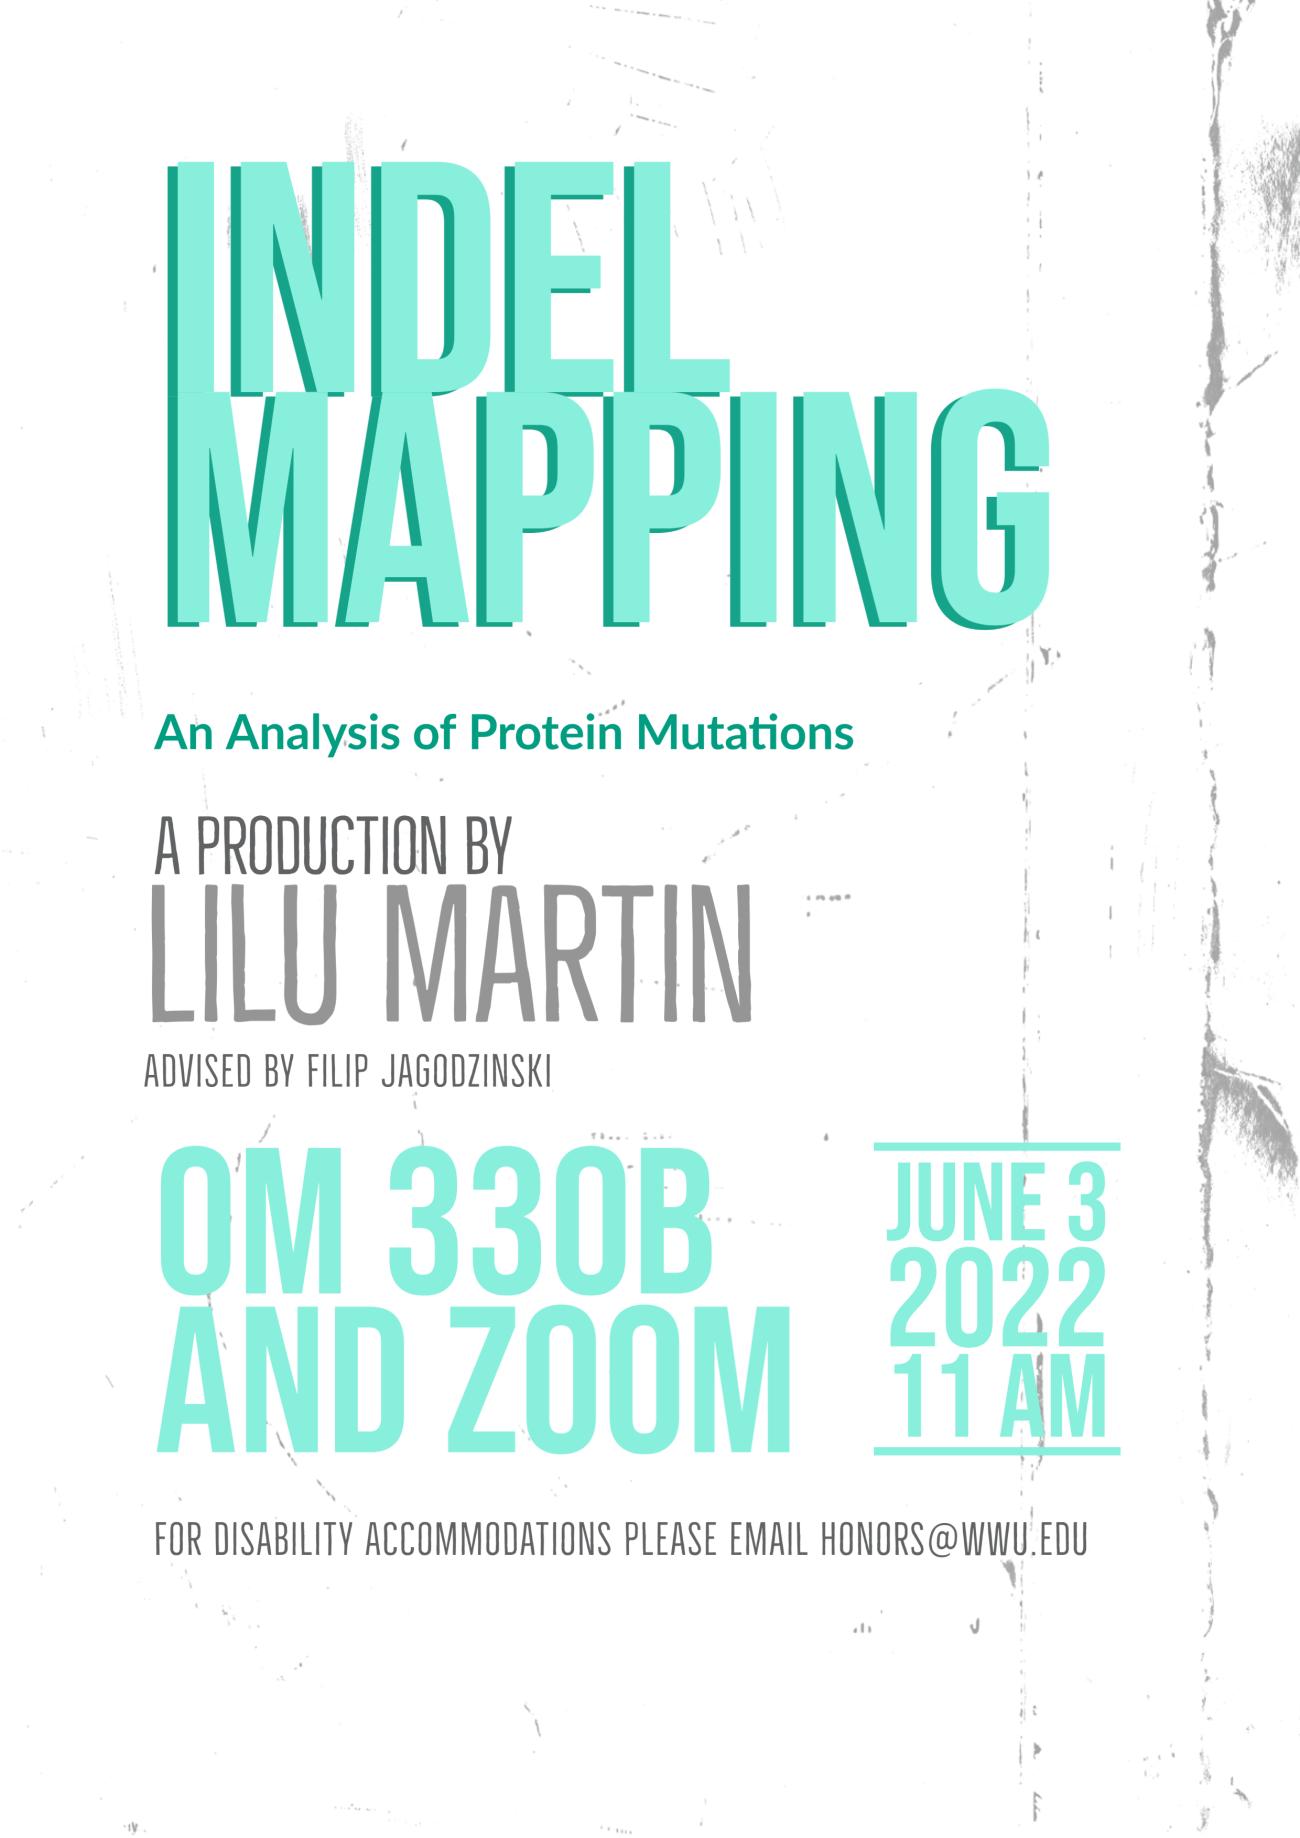 Light cyan text on a white background reads: "Indel mapping, an analysis of protein mutations. A Production by Lilu Martin, advised by Filip Jagodzinski. At Old Main 33B and Zoom on June 3rd at 11am. For disability accommodations, please email Honors@wwu.edu."